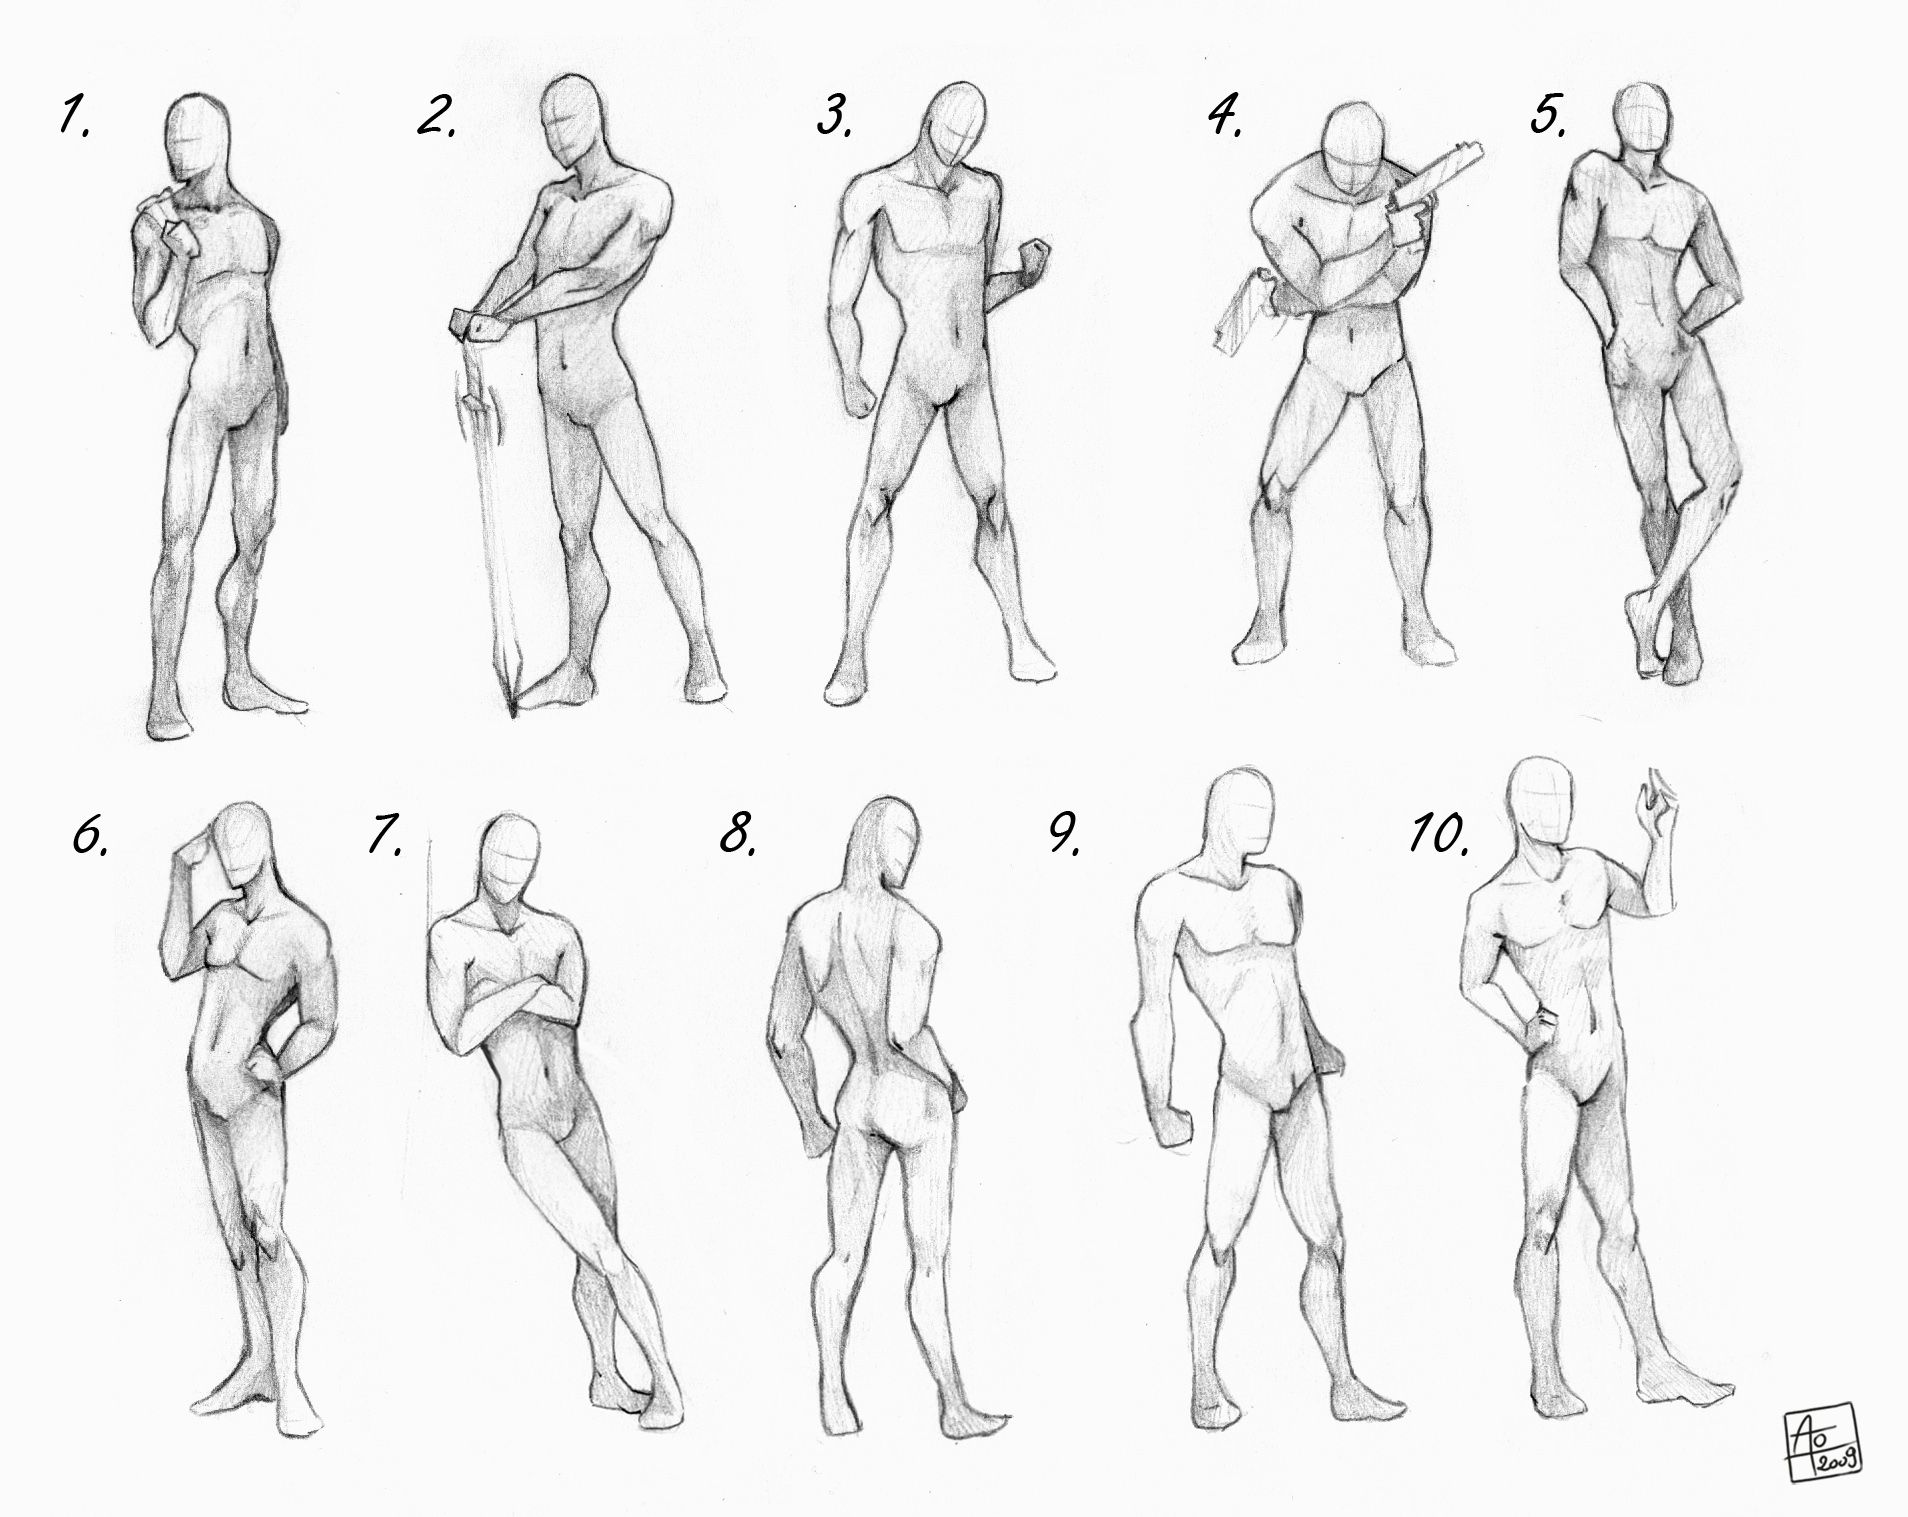 Photos: Male Pose Sketches, - DRAWING ART GALLERY